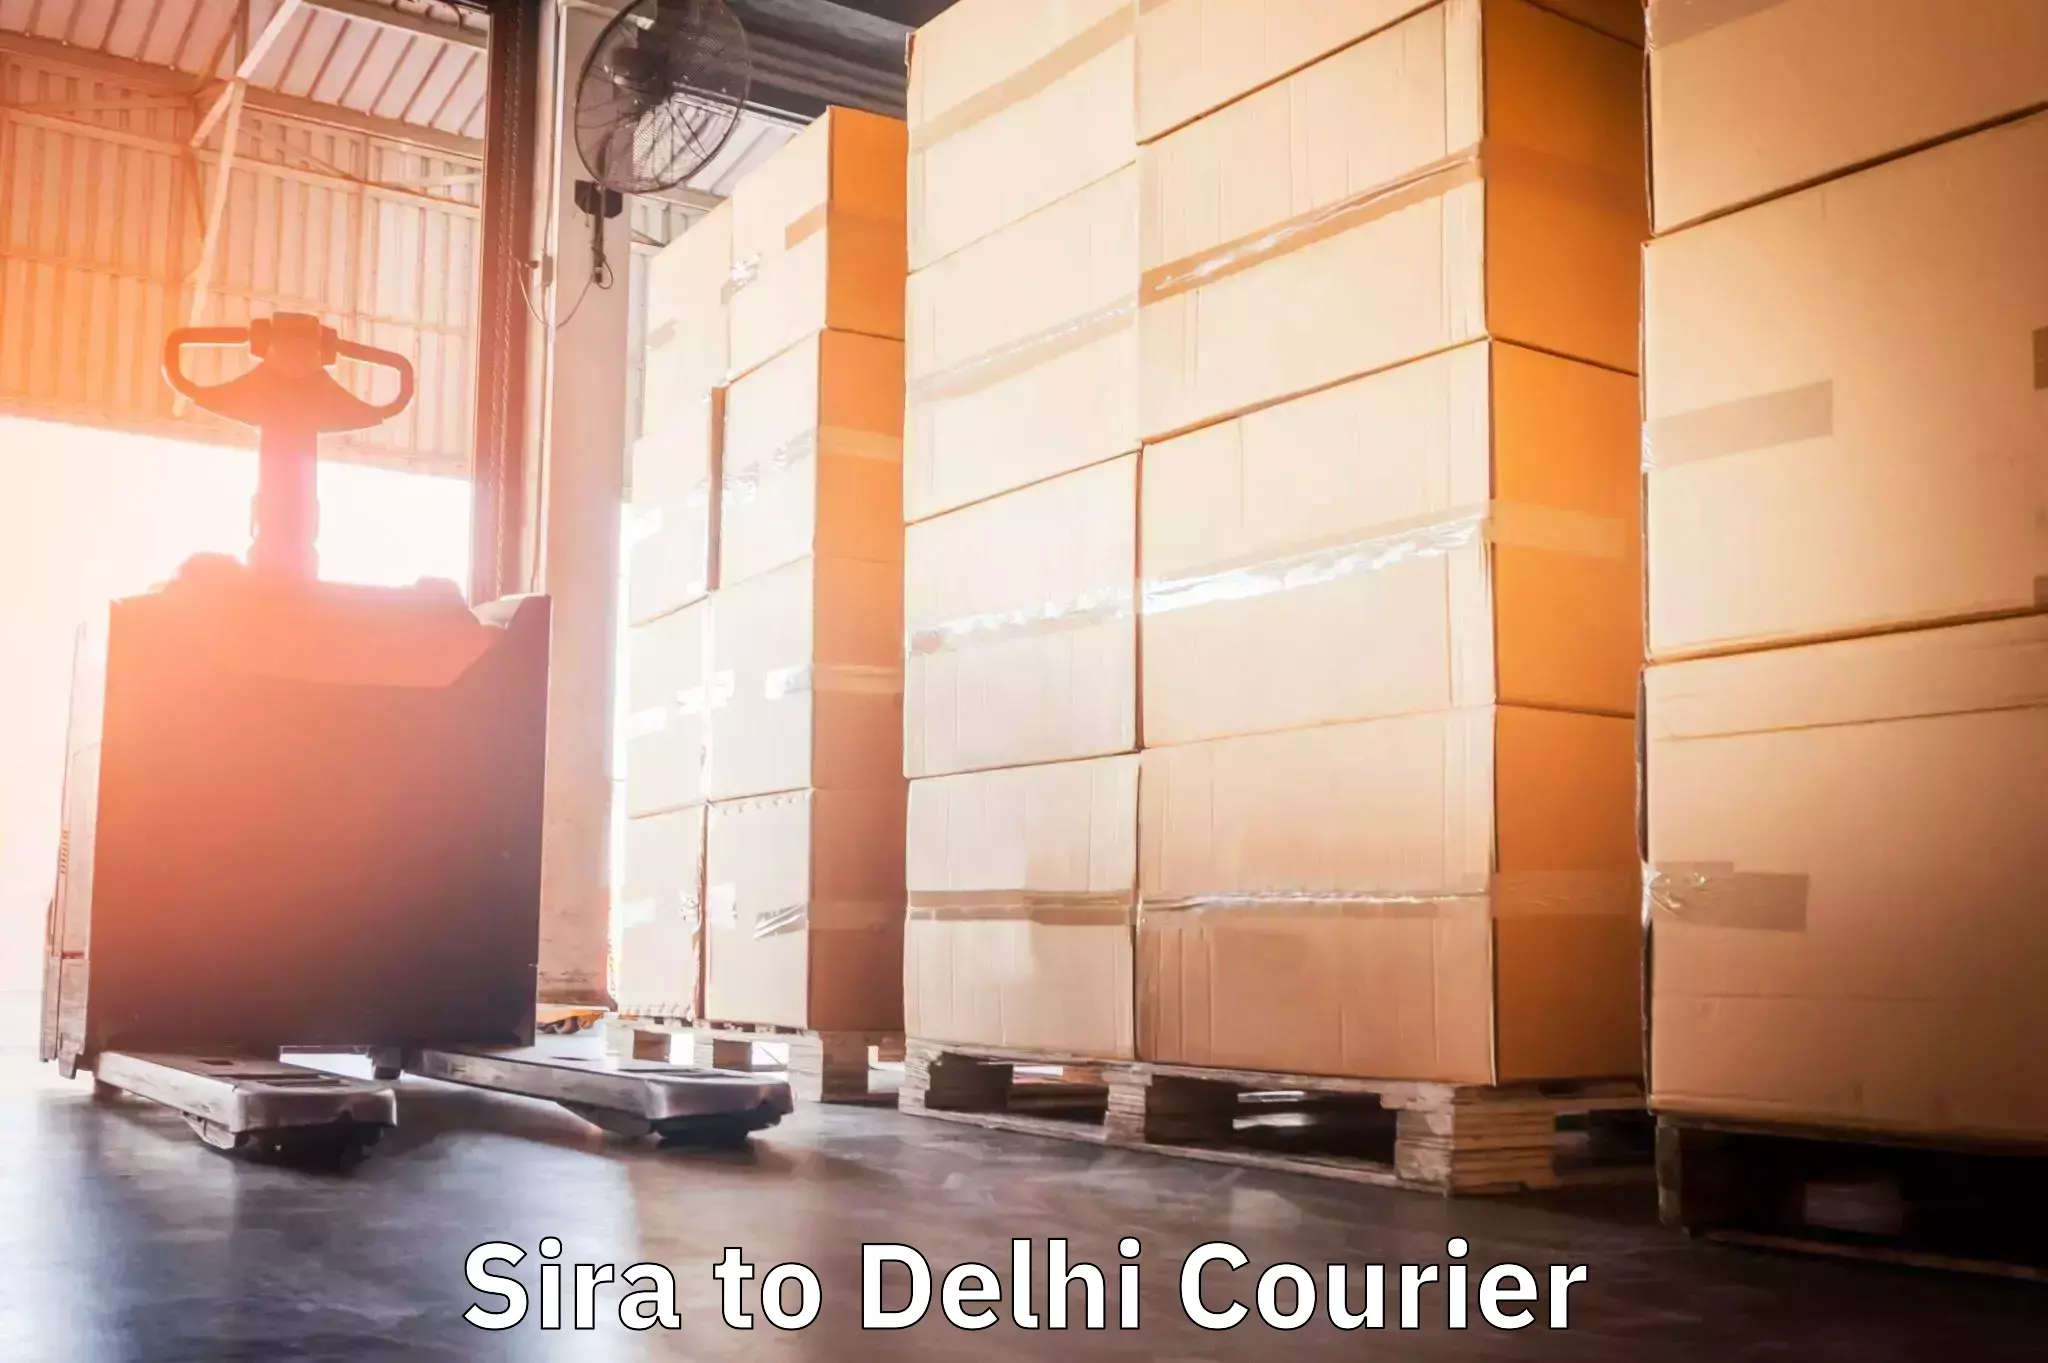 On-demand shipping options Sira to Lodhi Road